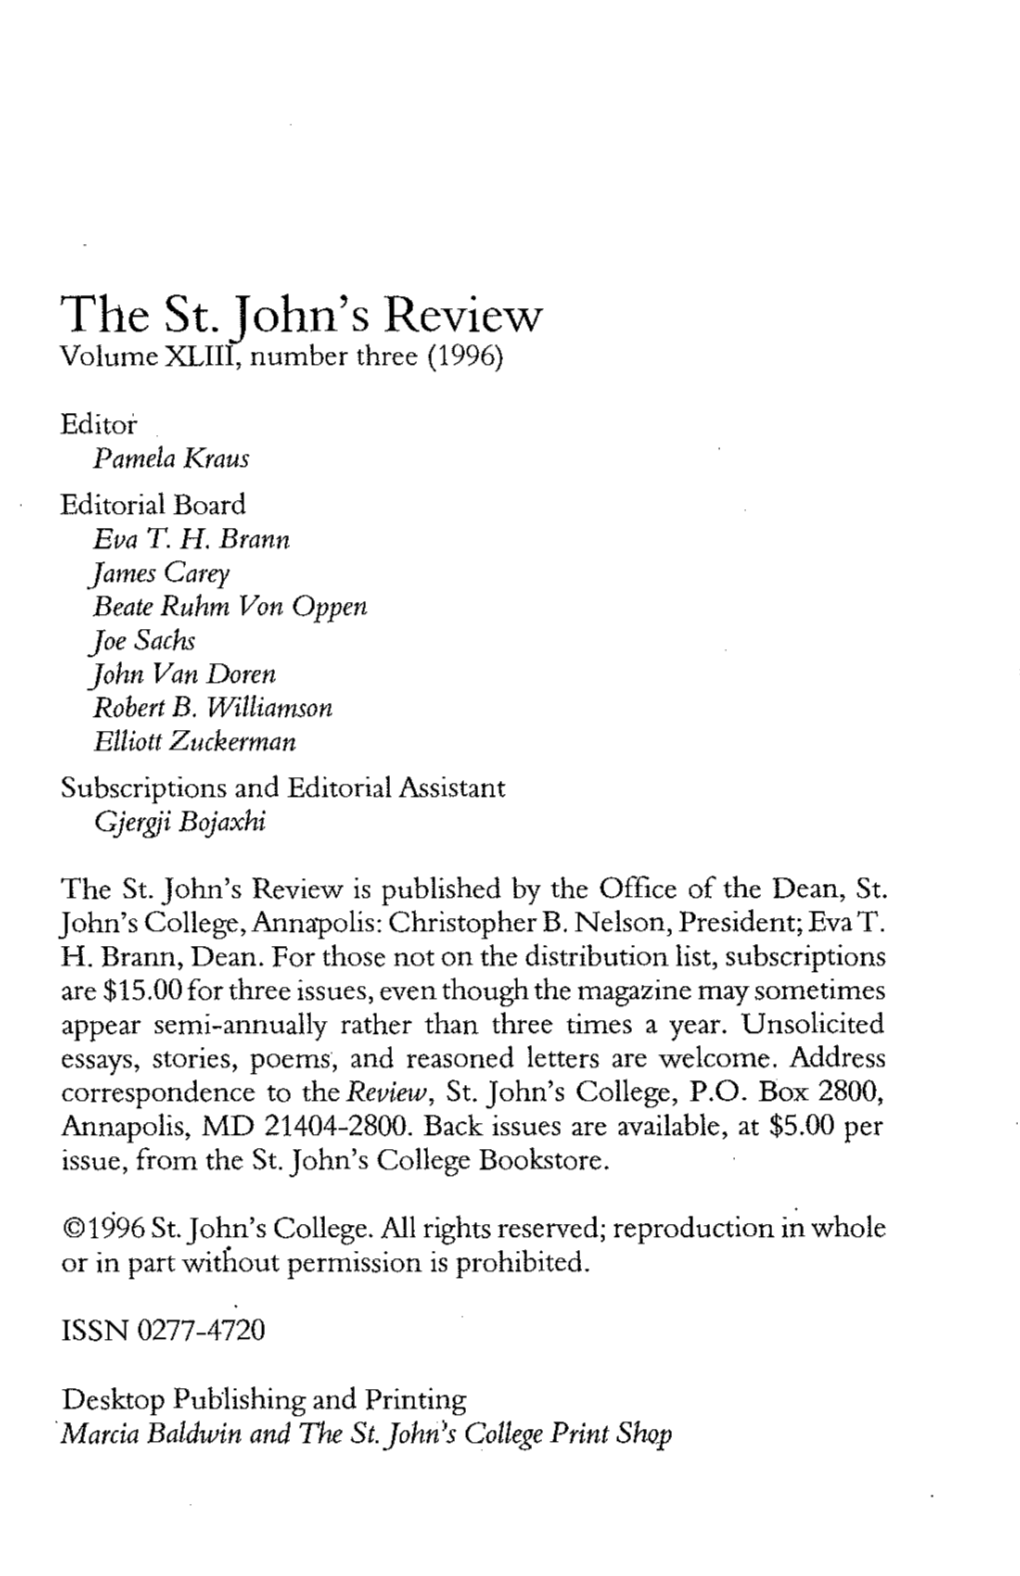 The St. John's Review Volume XLIII, Number Three (1996)